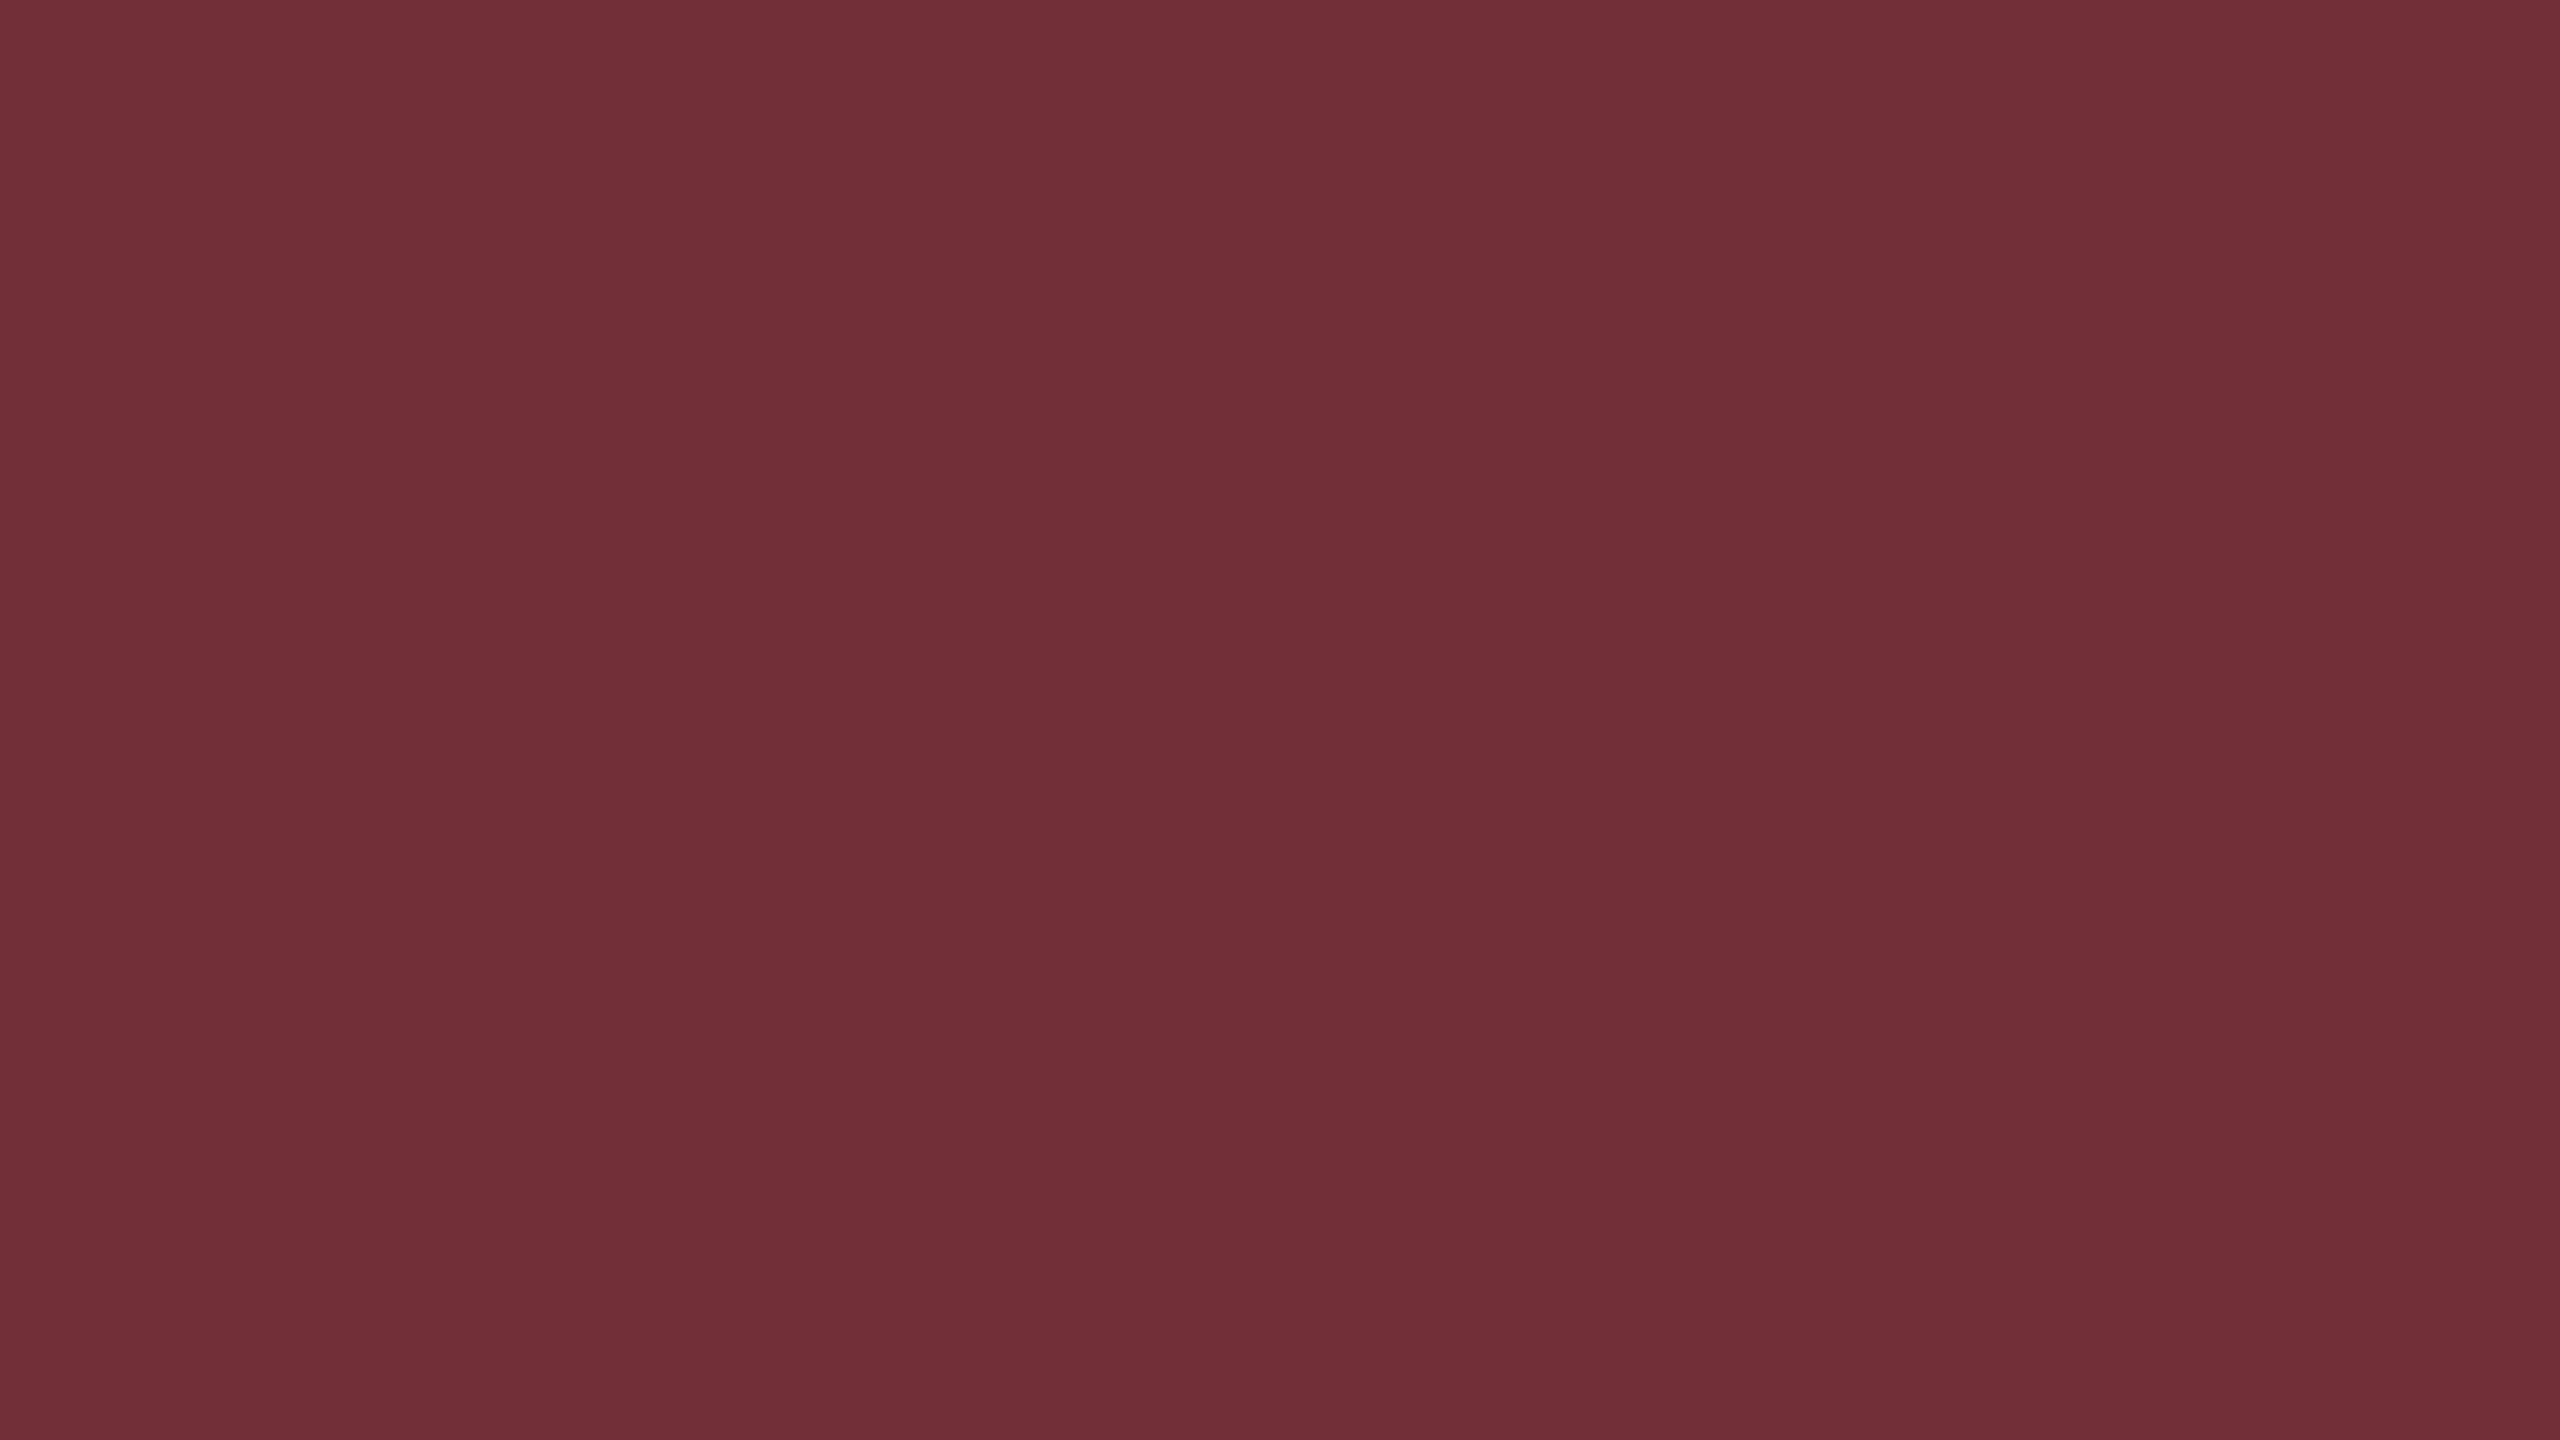 2560x1440 Wine Solid Color Background